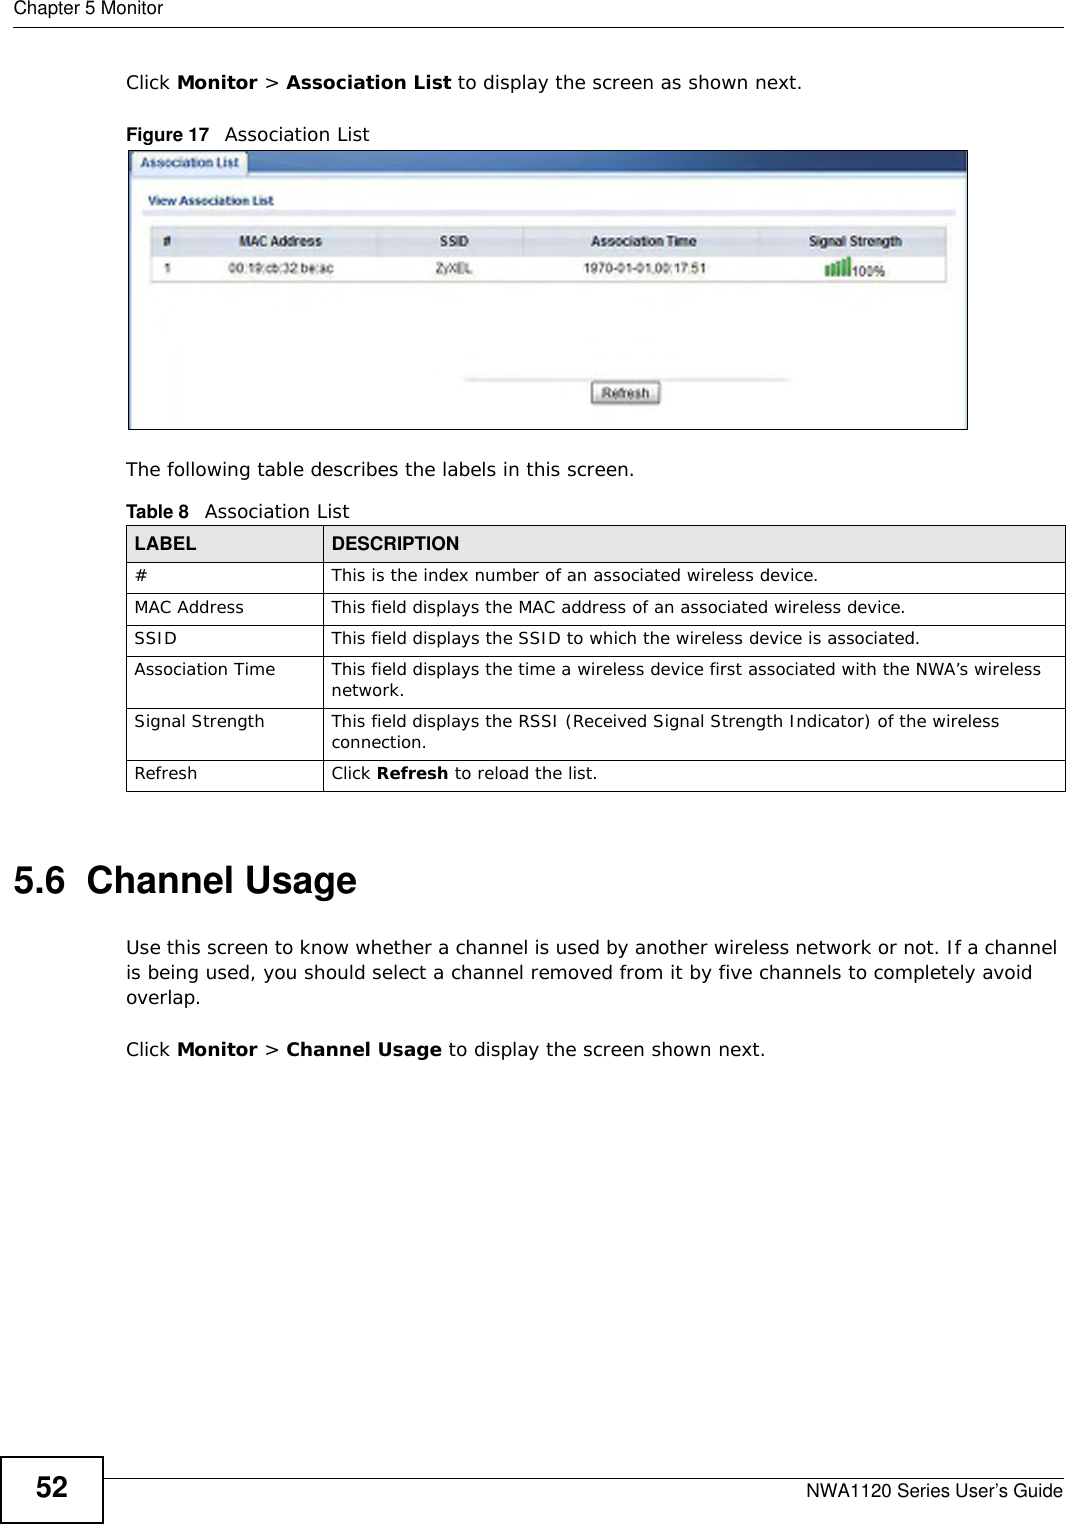 Chapter 5 MonitorNWA1120 Series User’s Guide52Click Monitor &gt; Association List to display the screen as shown next.Figure 17   Association ListThe following table describes the labels in this screen.5.6  Channel UsageUse this screen to know whether a channel is used by another wireless network or not. If a channel is being used, you should select a channel removed from it by five channels to completely avoid overlap. Click Monitor &gt; Channel Usage to display the screen shown next.Table 8   Association ListLABEL DESCRIPTION#This is the index number of an associated wireless device.MAC Address This field displays the MAC address of an associated wireless device.SSID This field displays the SSID to which the wireless device is associated.Association Time This field displays the time a wireless device first associated with the NWA’s wireless network.Signal Strength This field displays the RSSI (Received Signal Strength Indicator) of the wireless connection.Refresh Click Refresh to reload the list. 